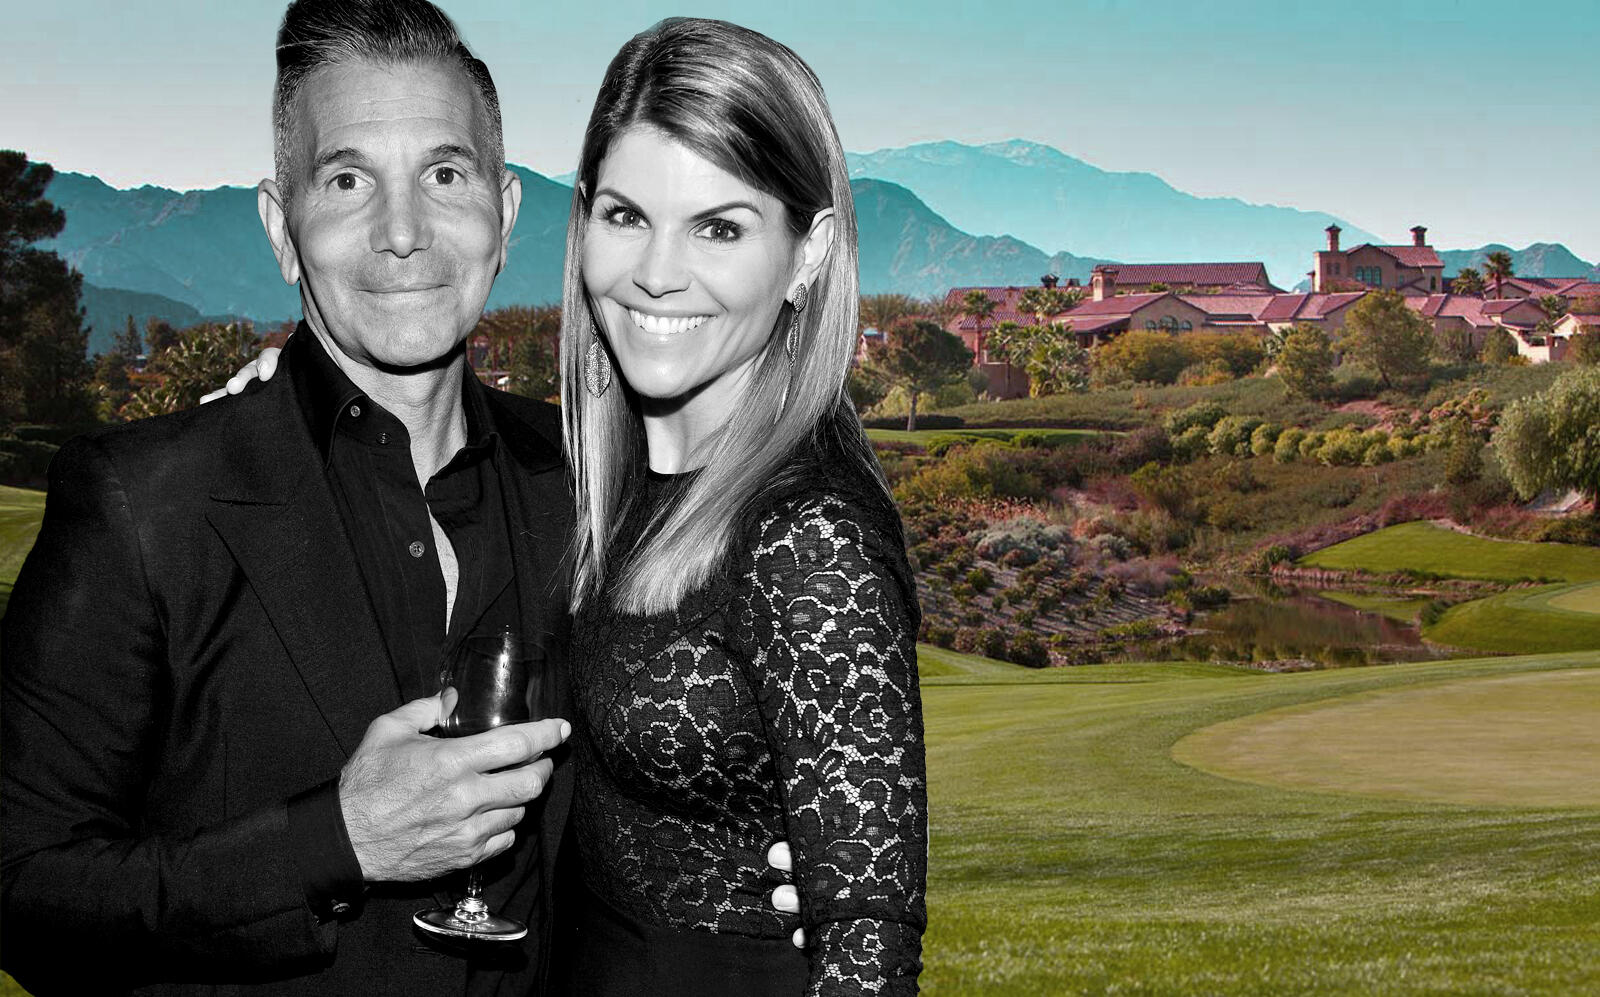 Mossimo Giannulli and Lori Loughlin with The Madison Club where their house is located (The Madison Club, Getty)